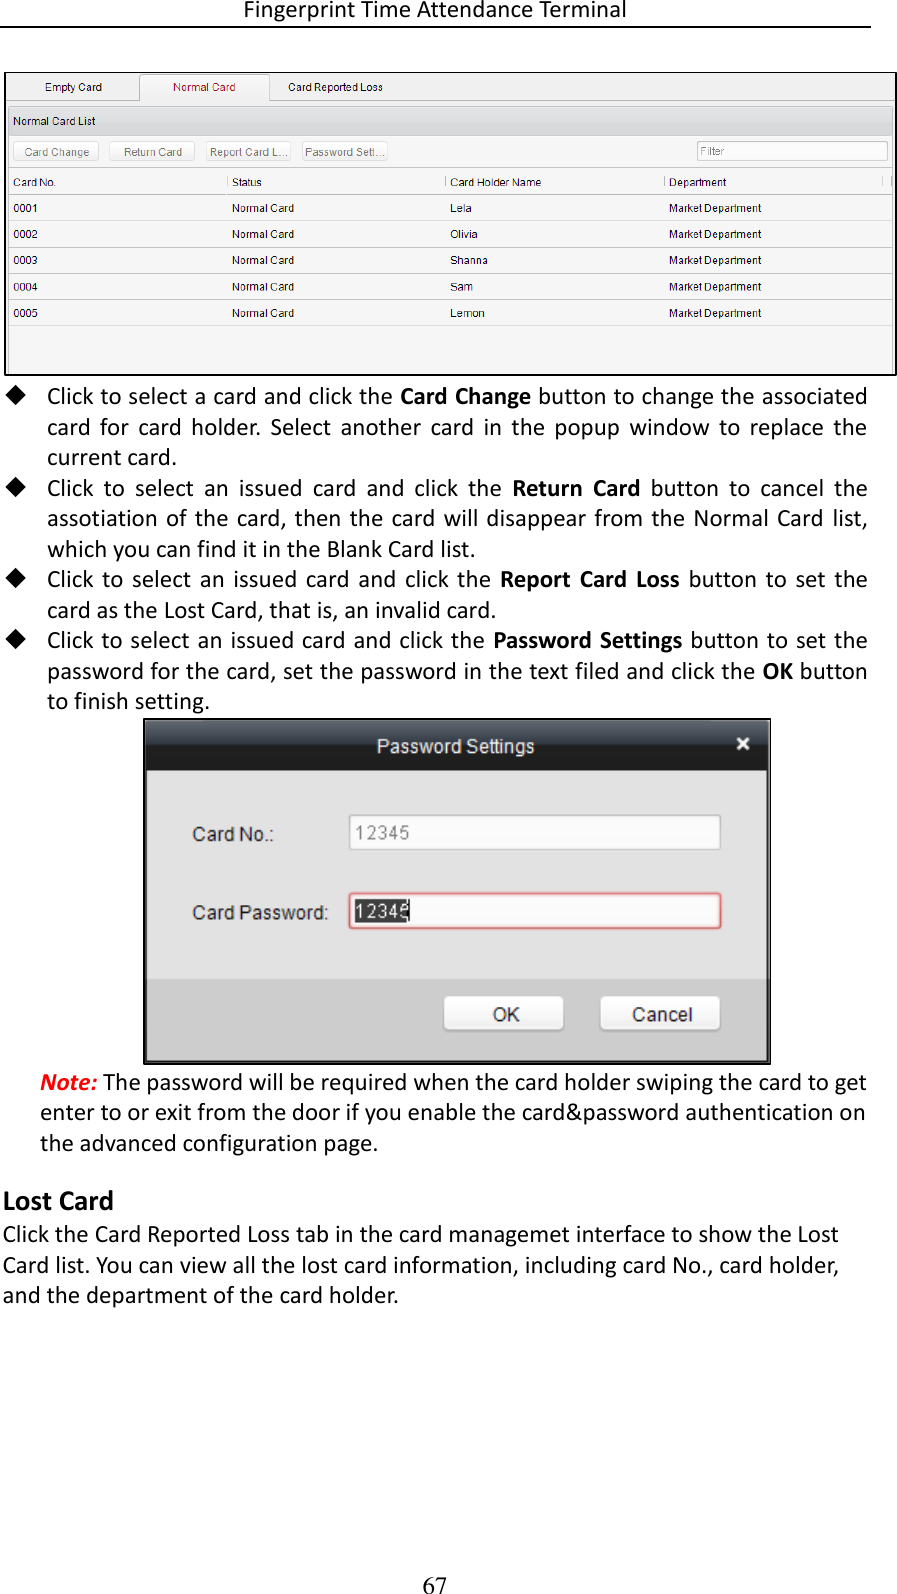 Fingerprint Time Attendance Terminal 67   Click to select a card and click the Card Change button to change the associated card  for  card  holder.  Select  another  card  in  the  popup  window  to  replace  the current card.  Click  to  select  an  issued  card  and  click  the  Return  Card  button  to  cancel  the assotiation of the card, then the card will disappear from the Normal Card  list, which you can find it in the Blank Card list.  Click to  select  an issued  card and  click  the  Report  Card  Loss  button to  set the card as the Lost Card, that is, an invalid card.  Click to select an issued card and click the Password Settings button to set the password for the card, set the password in the text filed and click the OK button to finish setting.  Note: The password will be required when the card holder swiping the card to get enter to or exit from the door if you enable the card&amp;password authentication on the advanced configuration page. Lost Card Click the Card Reported Loss tab in the card managemet interface to show the Lost Card list. You can view all the lost card information, including card No., card holder, and the department of the card holder. 